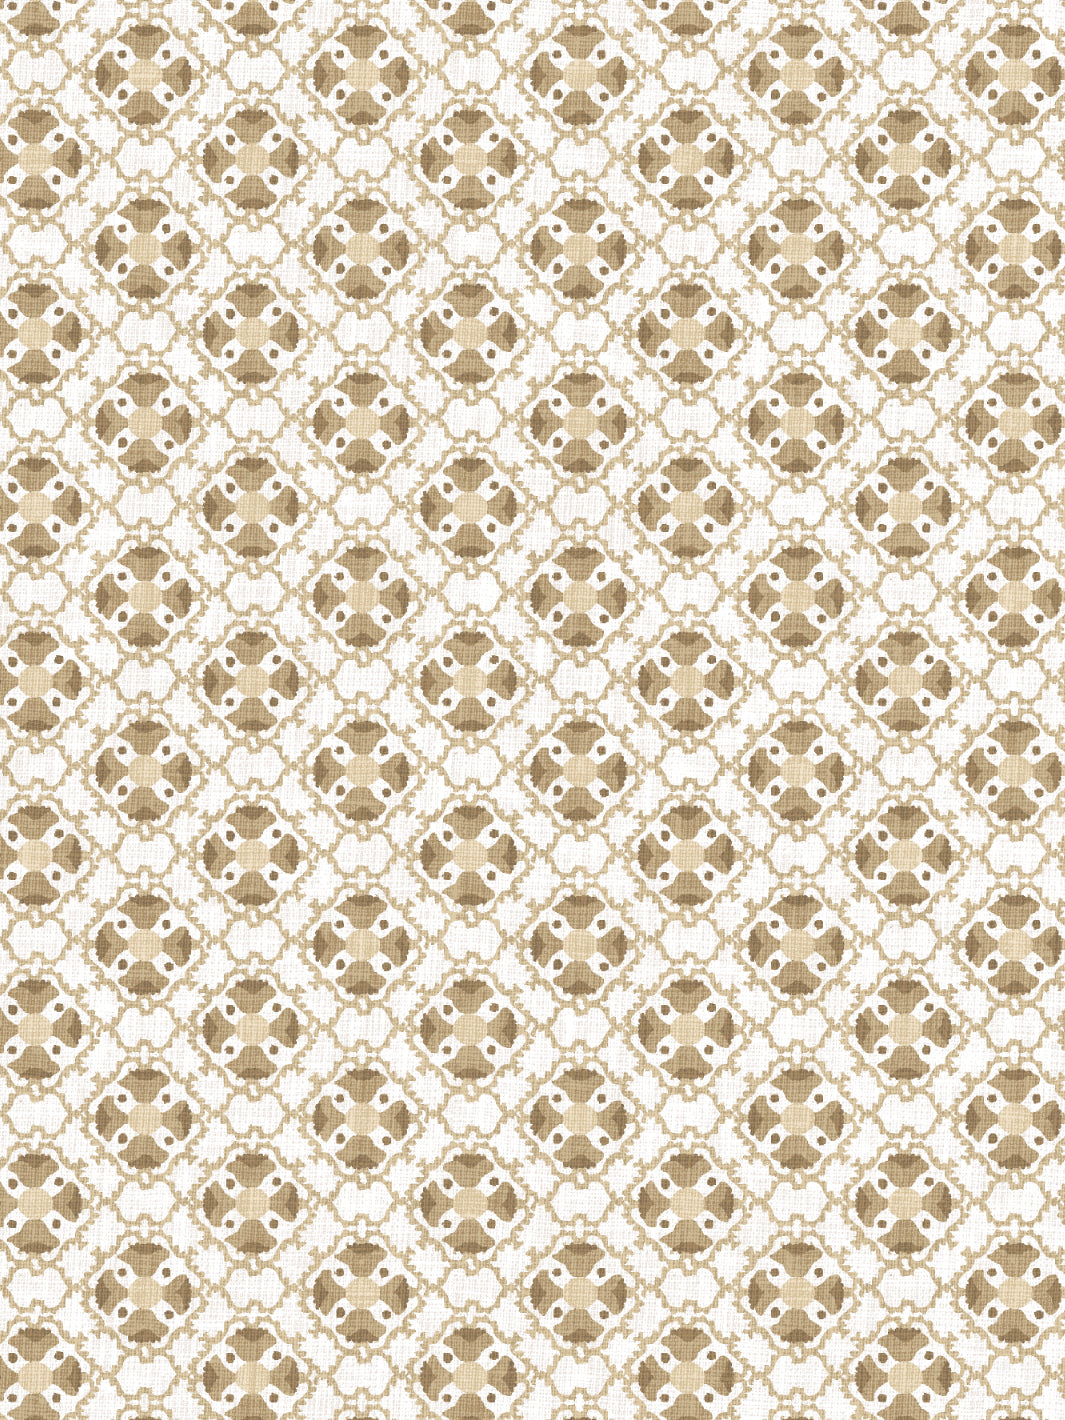 'Medallion All Over' Wallpaper by Nathan Turner - Gold